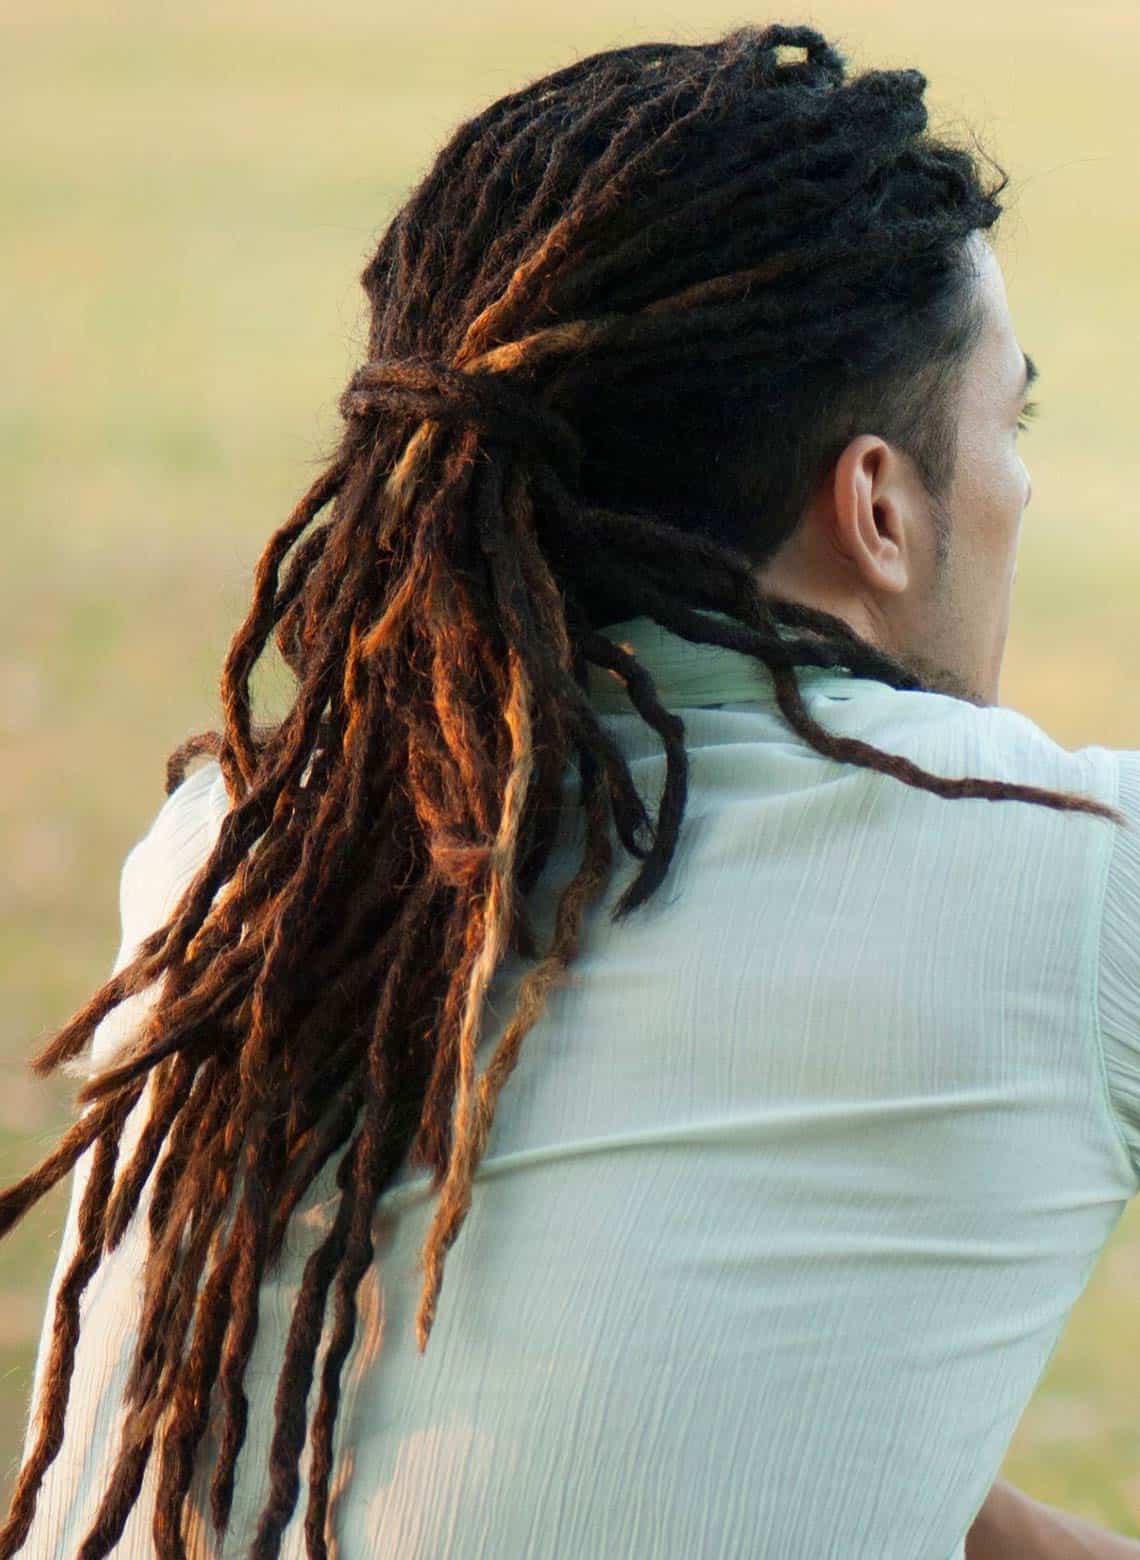 man with low ponytail dreads